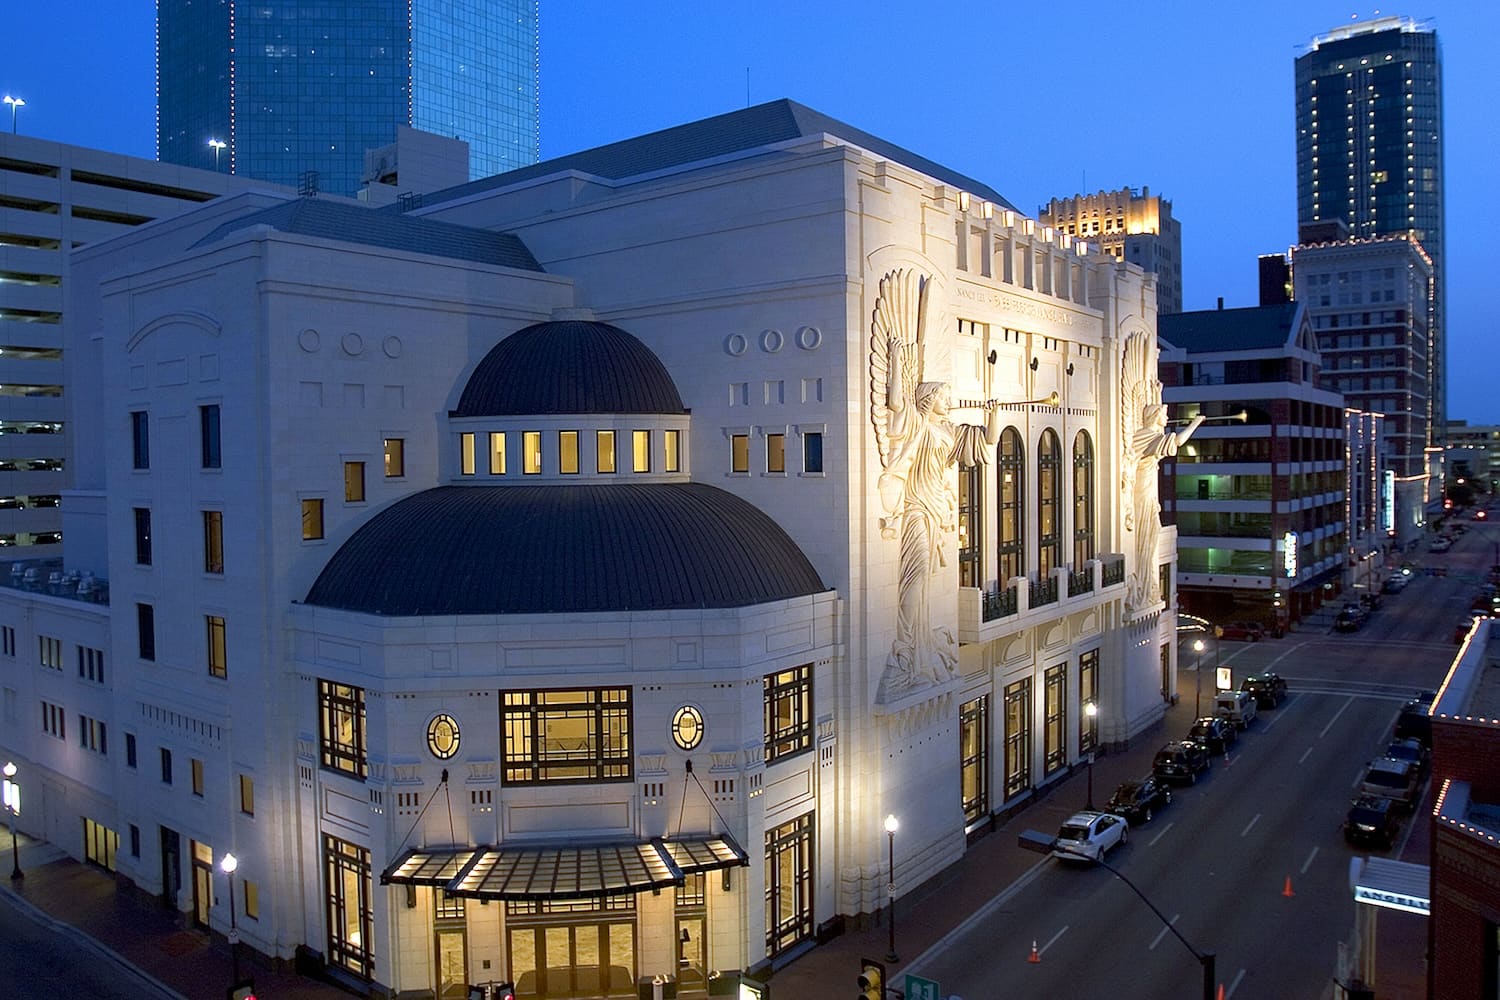 Bass Performance Hall in Fort Worth